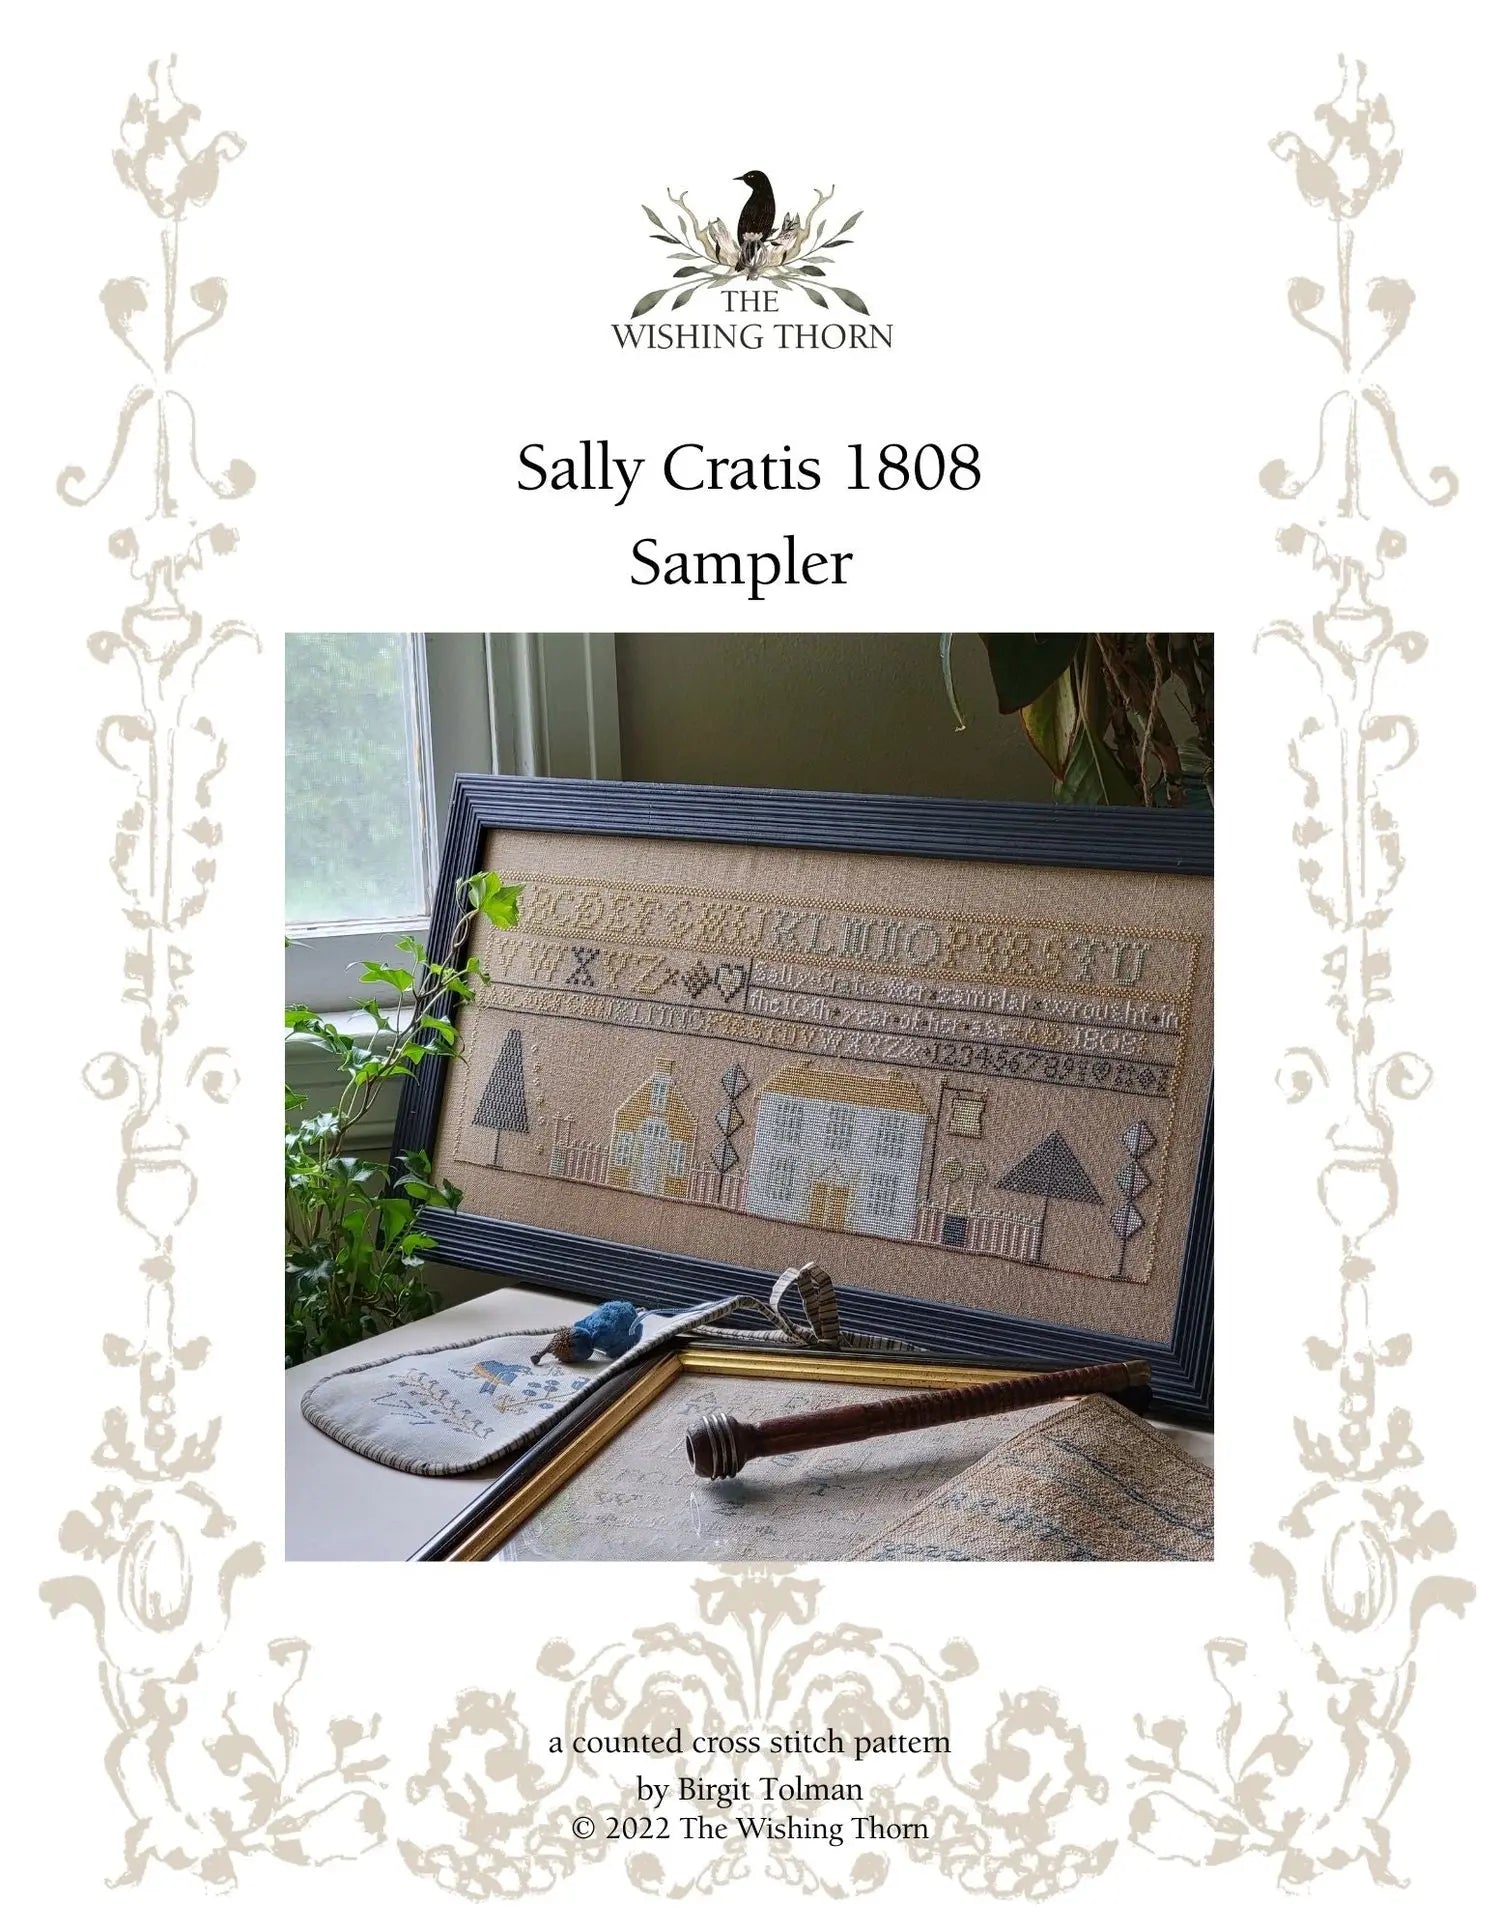 Sally Cratis 1808 Sampler by The Wishing Thorn The Wishing Thorn